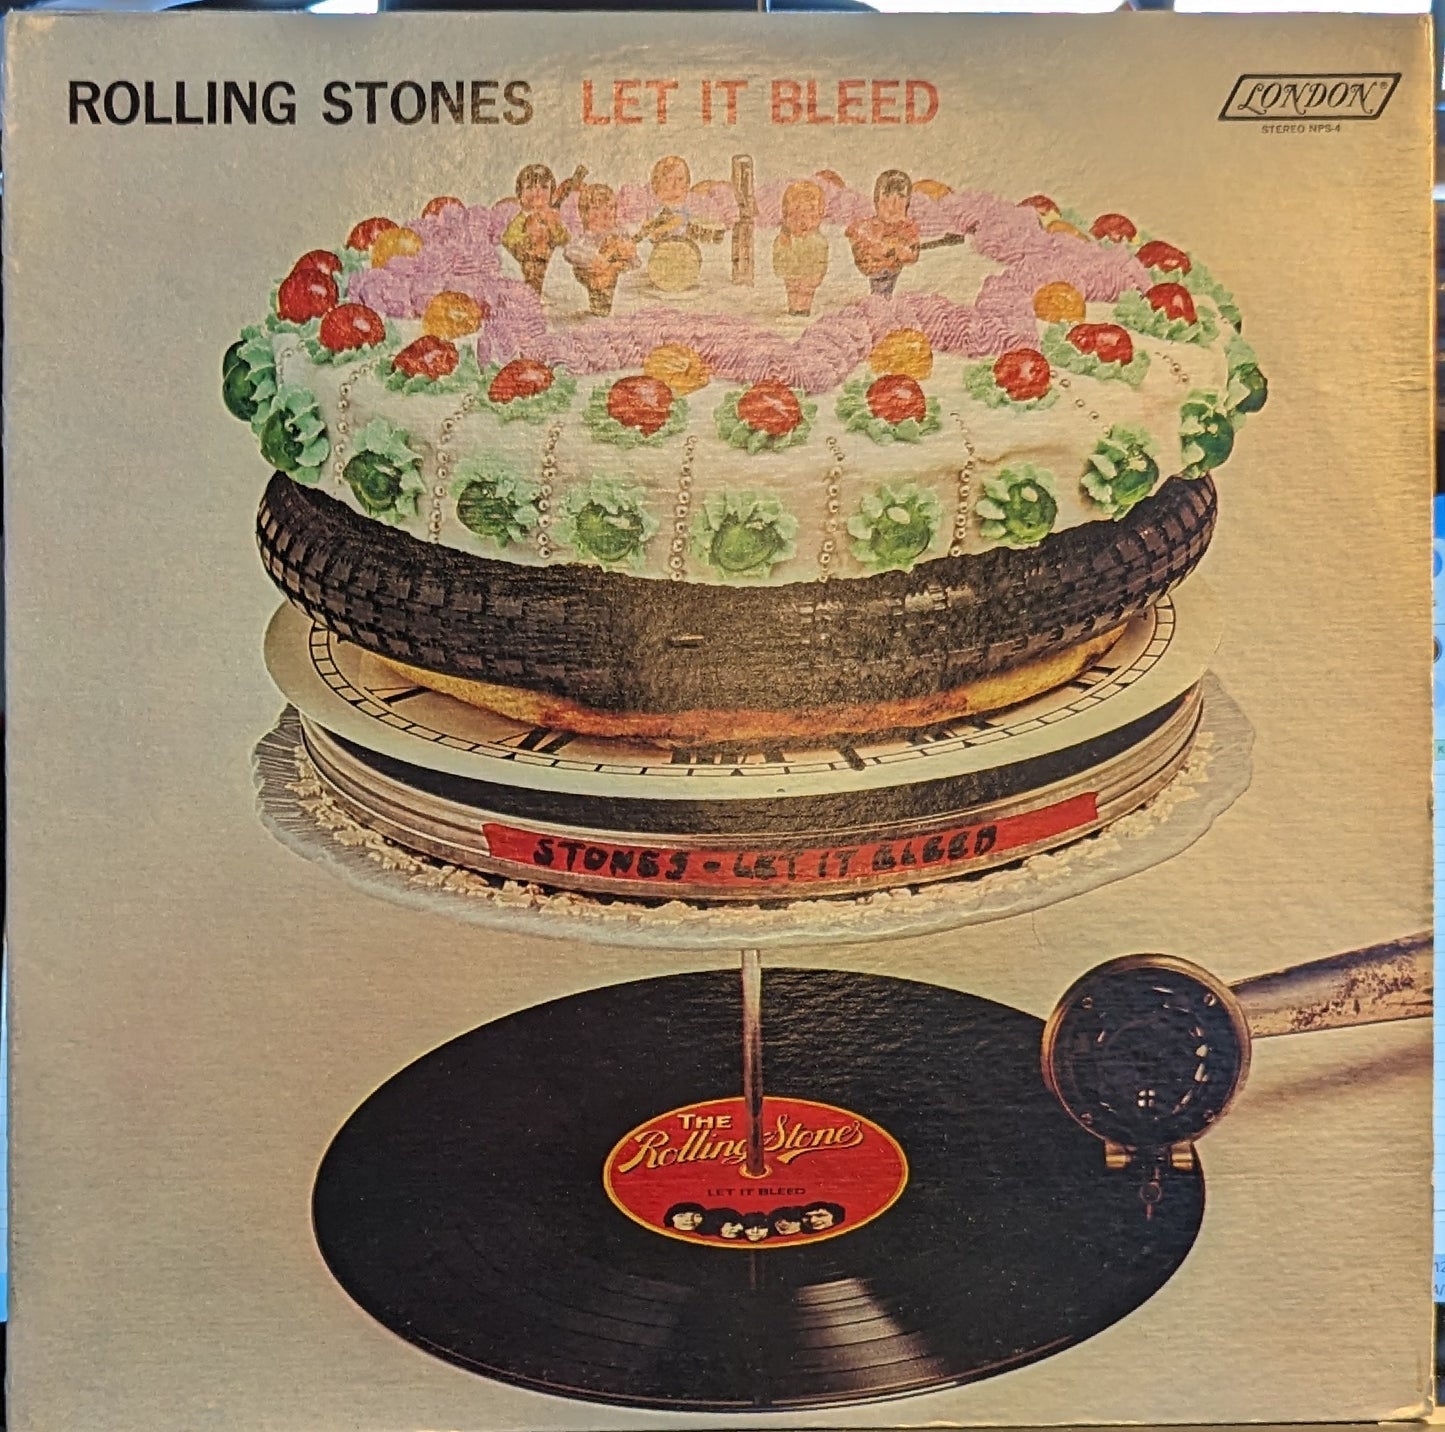 The Rolling Stones Let It Bleed *SHELLEY* LP Excellent (EX) Near Mint (NM or M-)